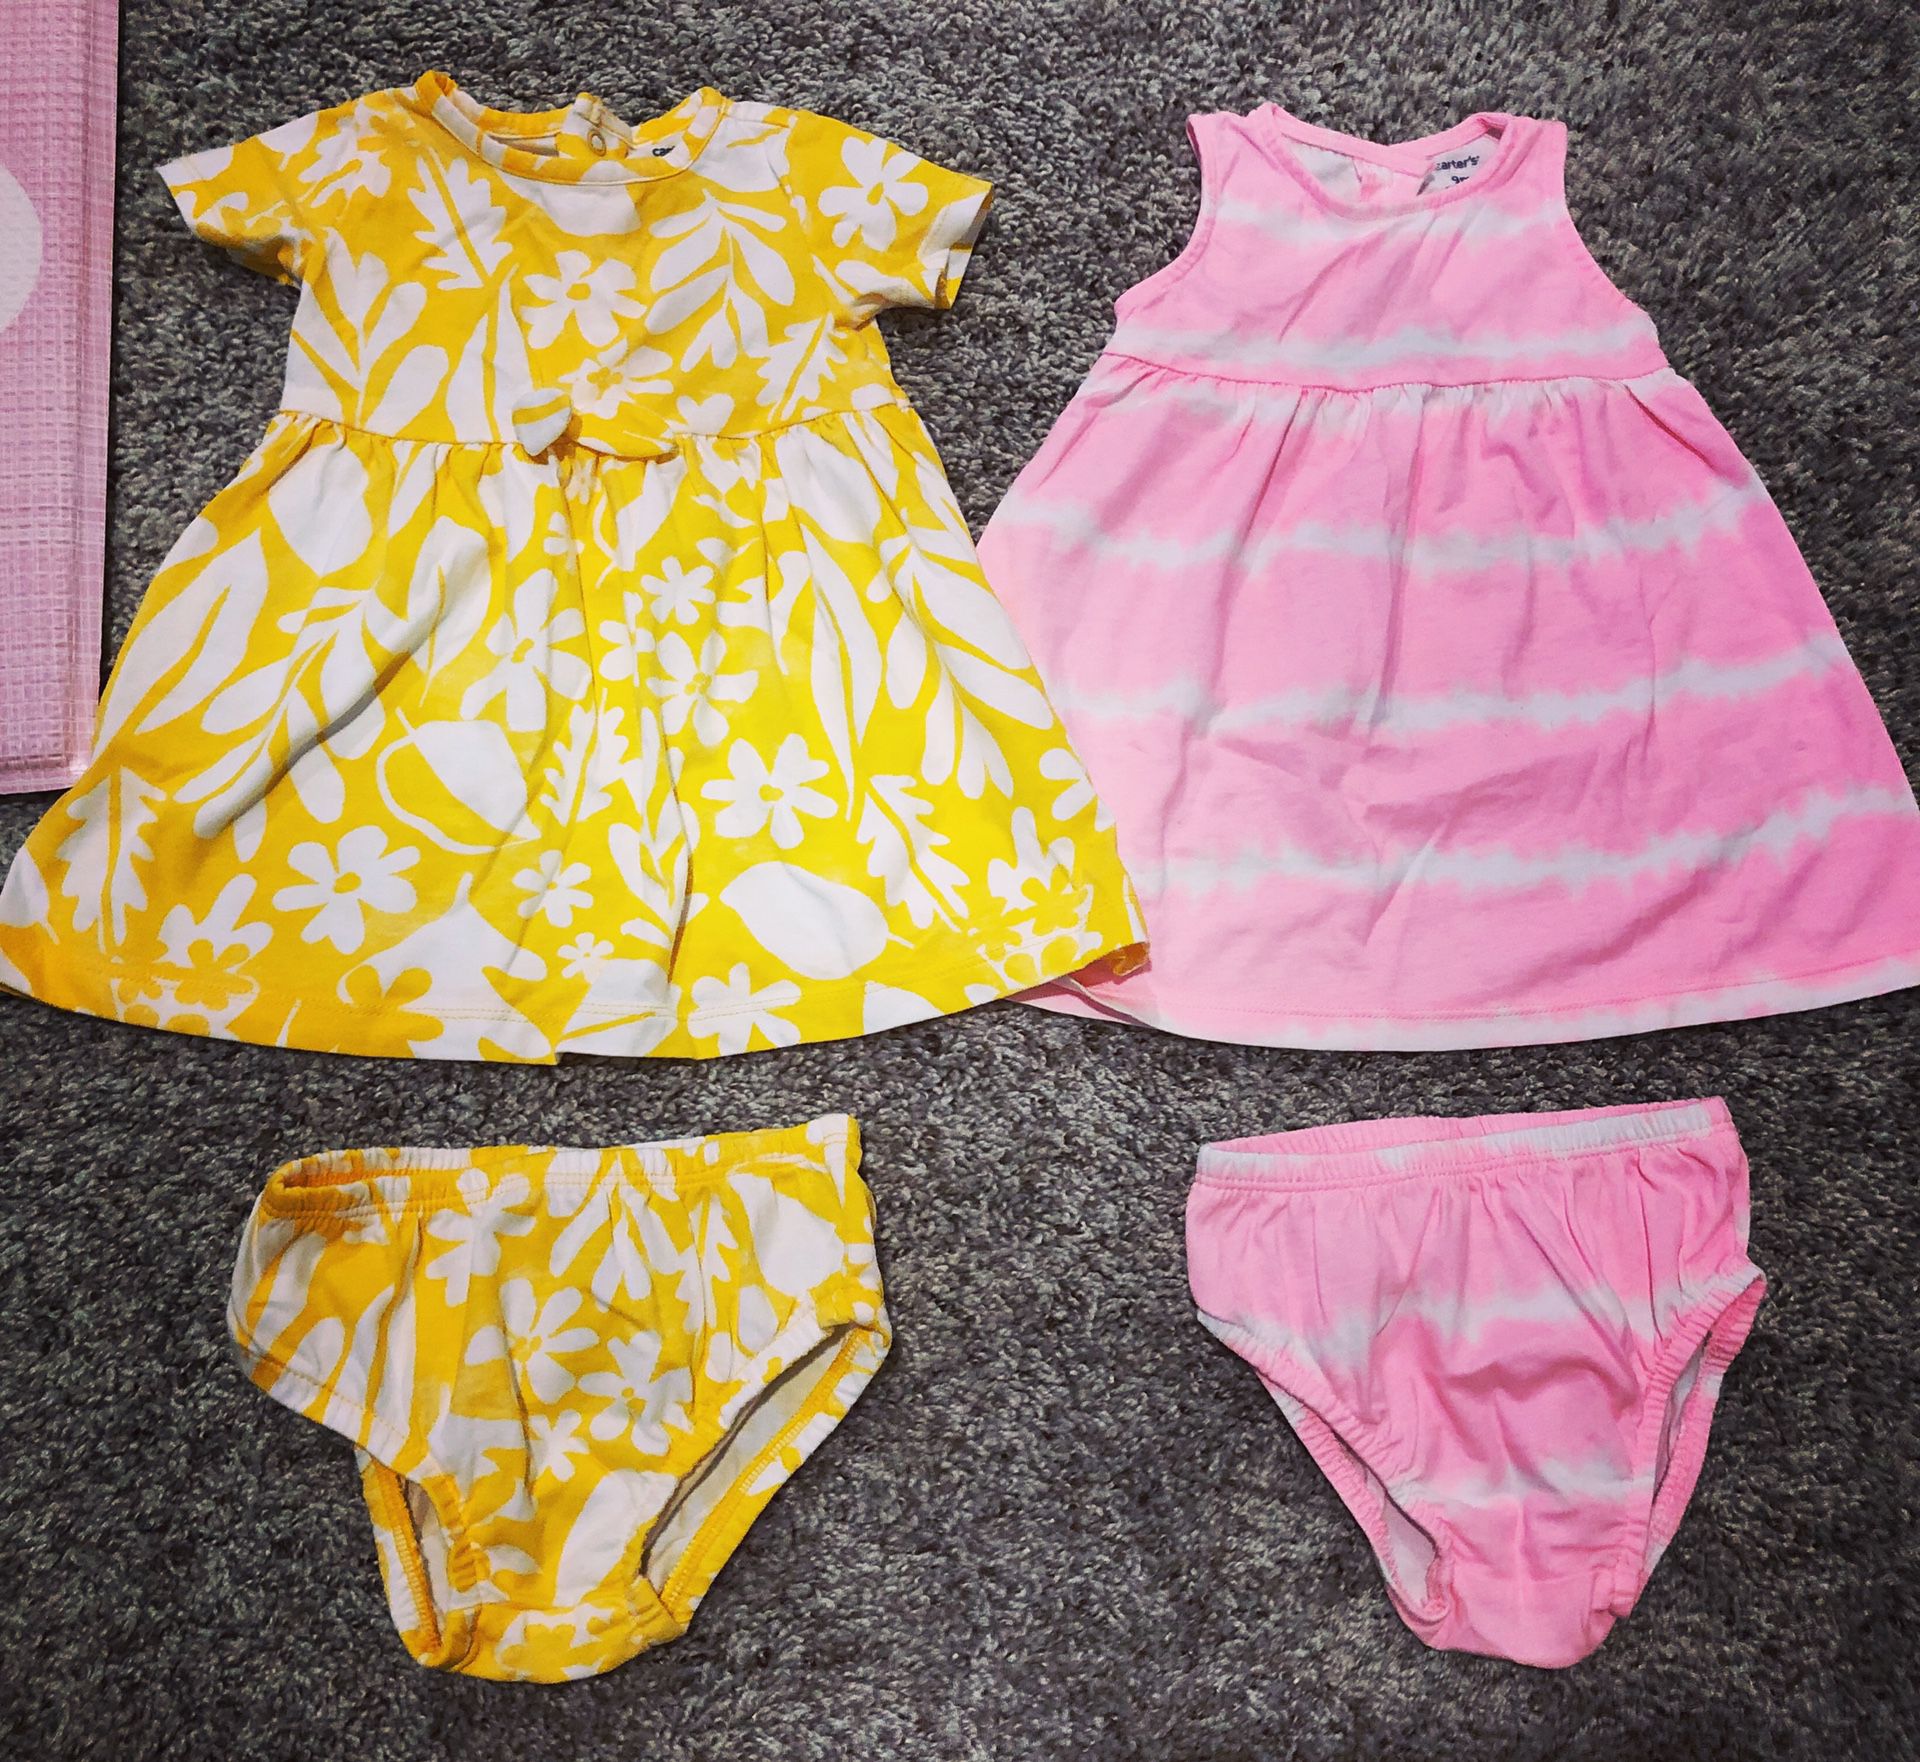 Carter’s Jersey Dresses (Two) 9 Month - New w/o Tag